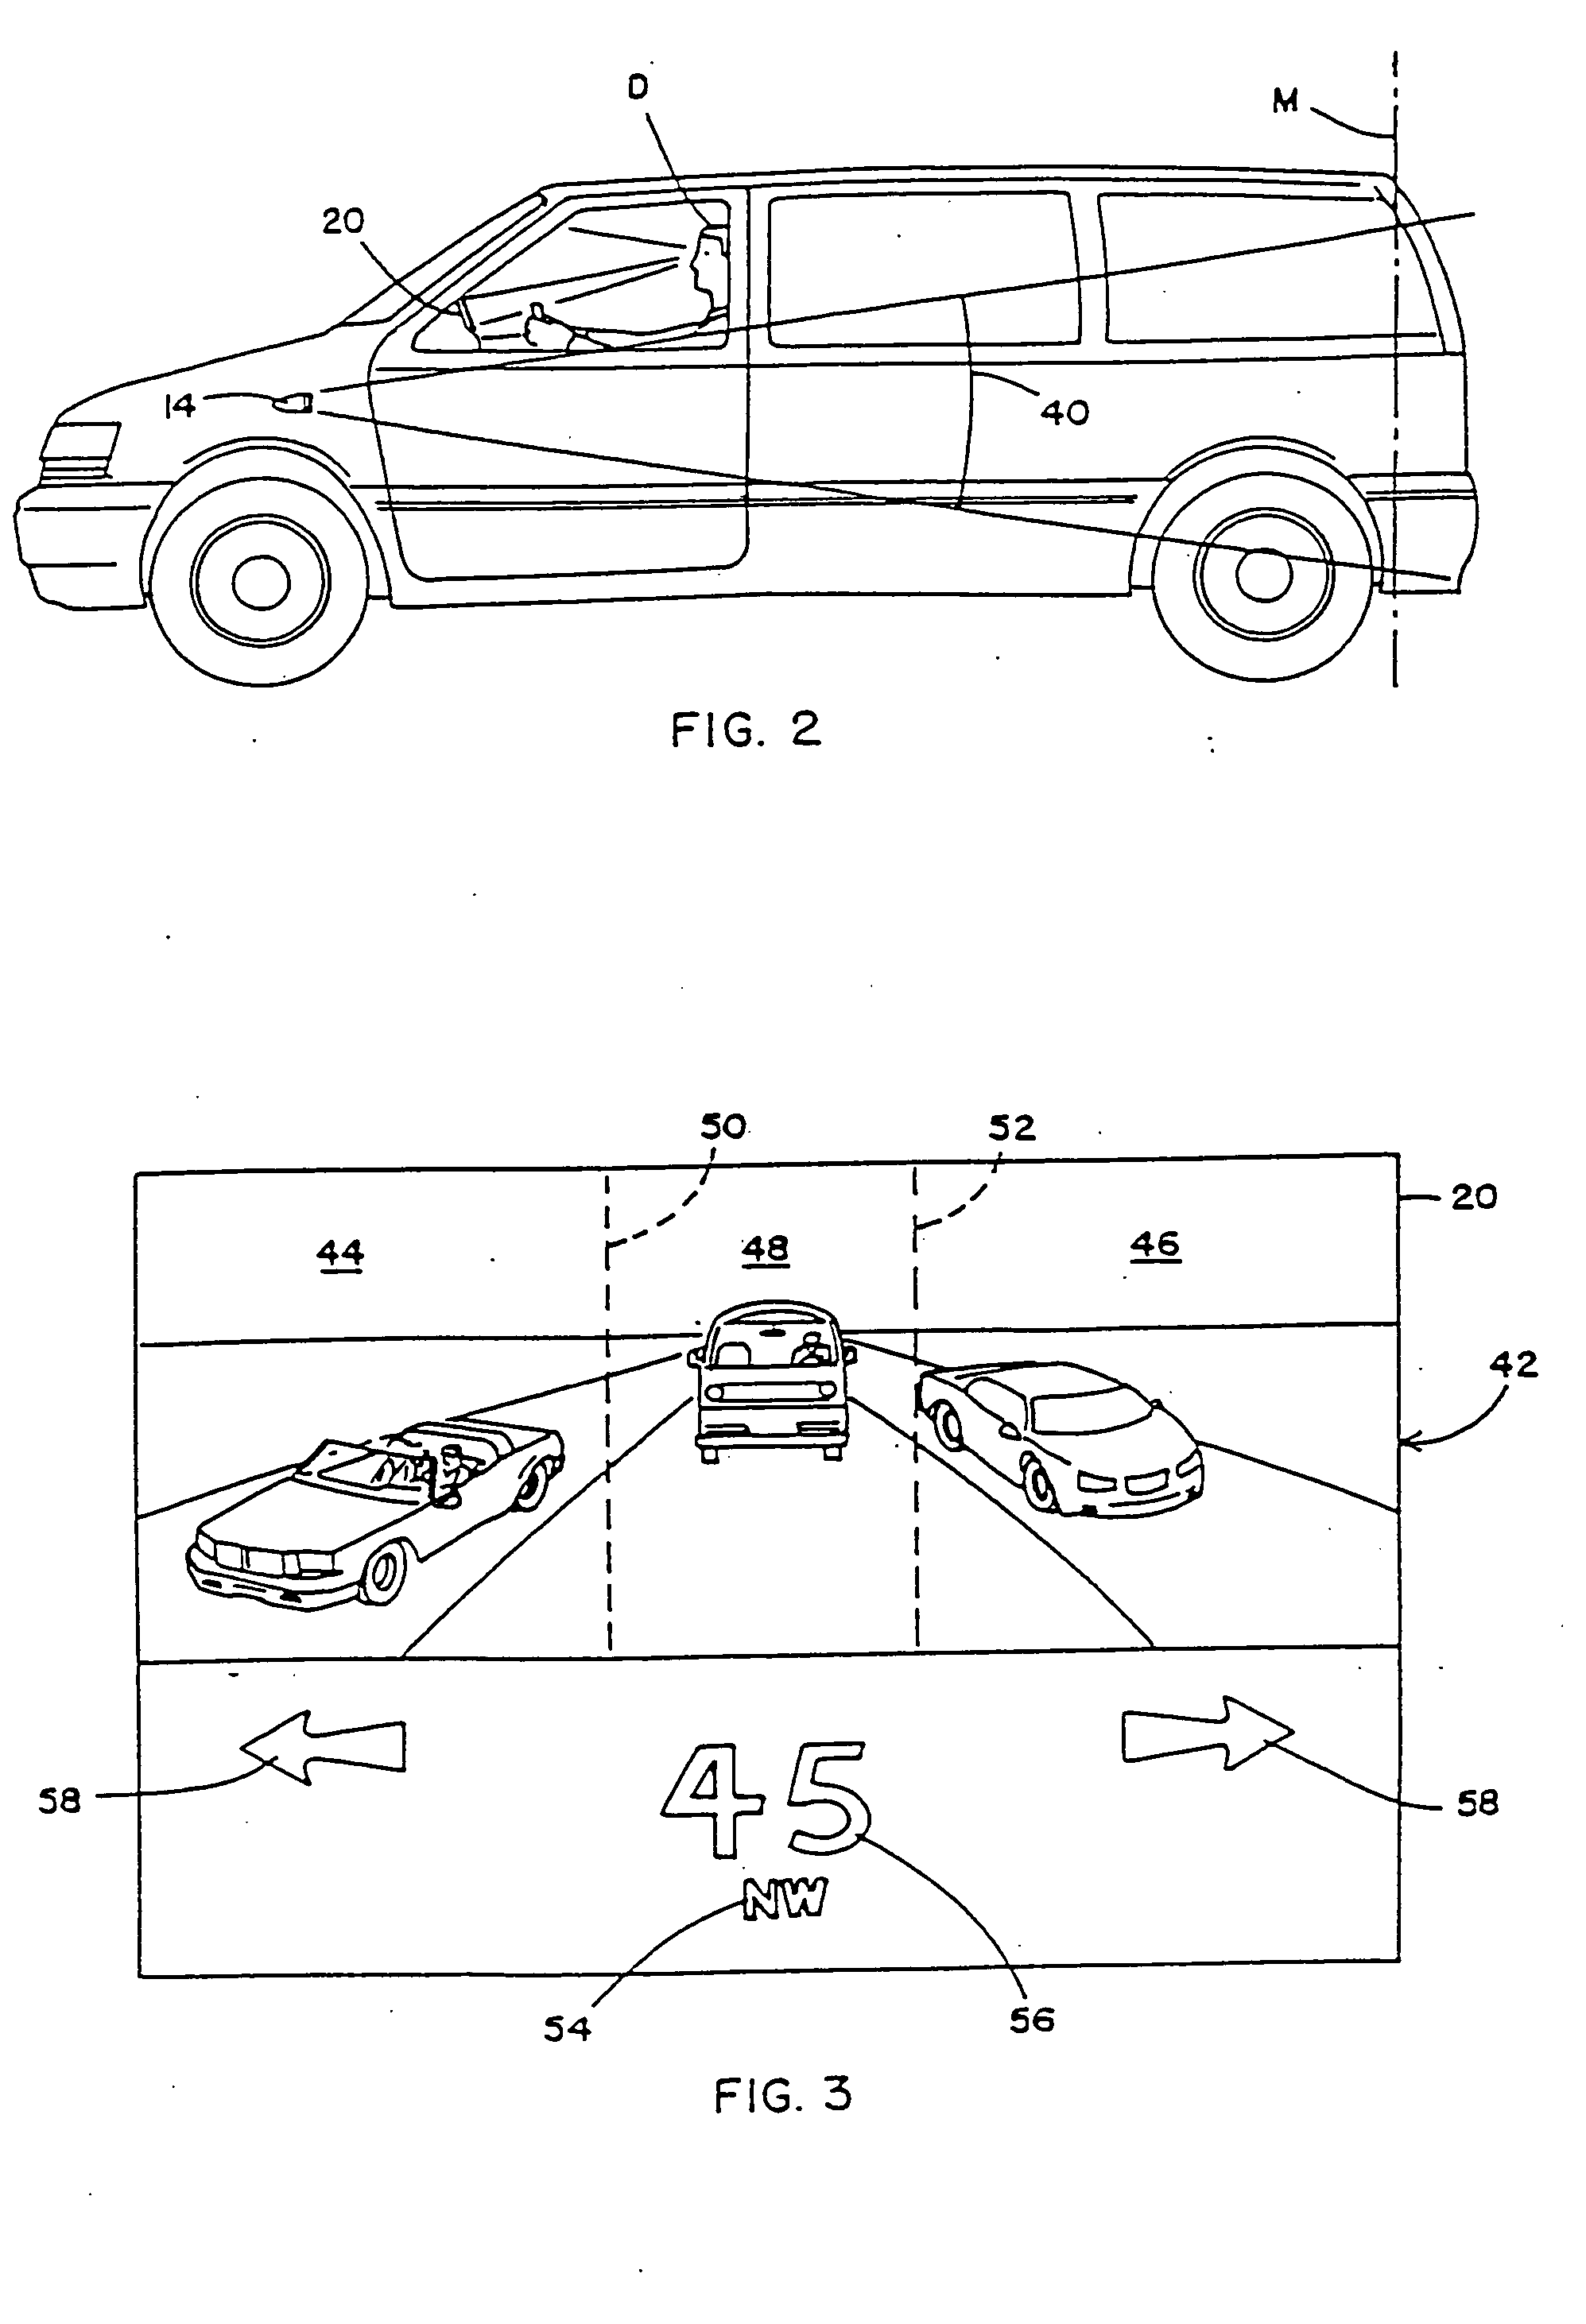 Image sensing system for a vehicle